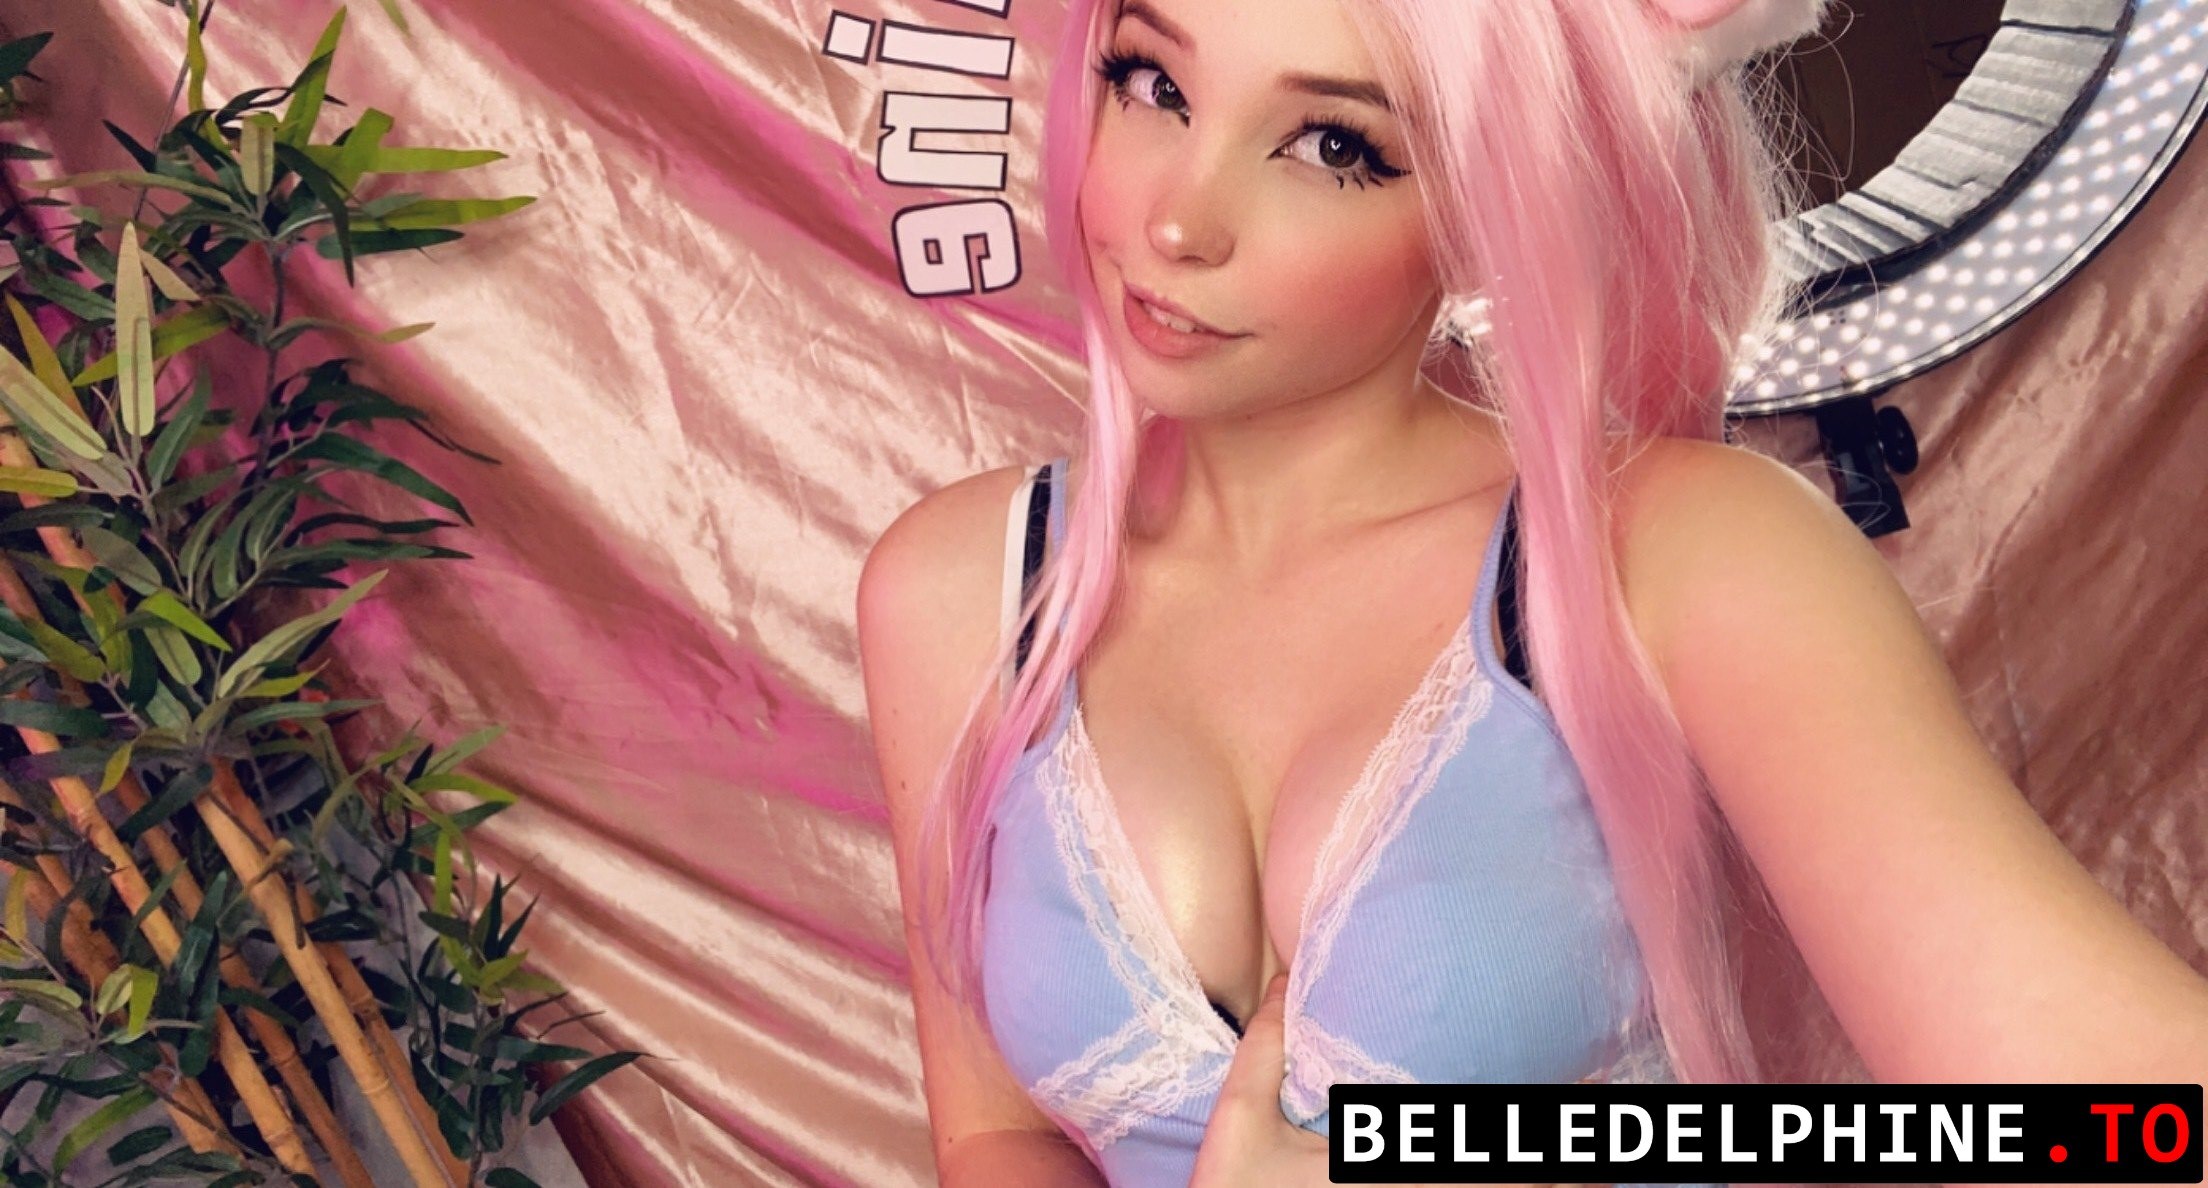 SD-02458 Belle Delphine A Woman With Pink Hair Wearing A